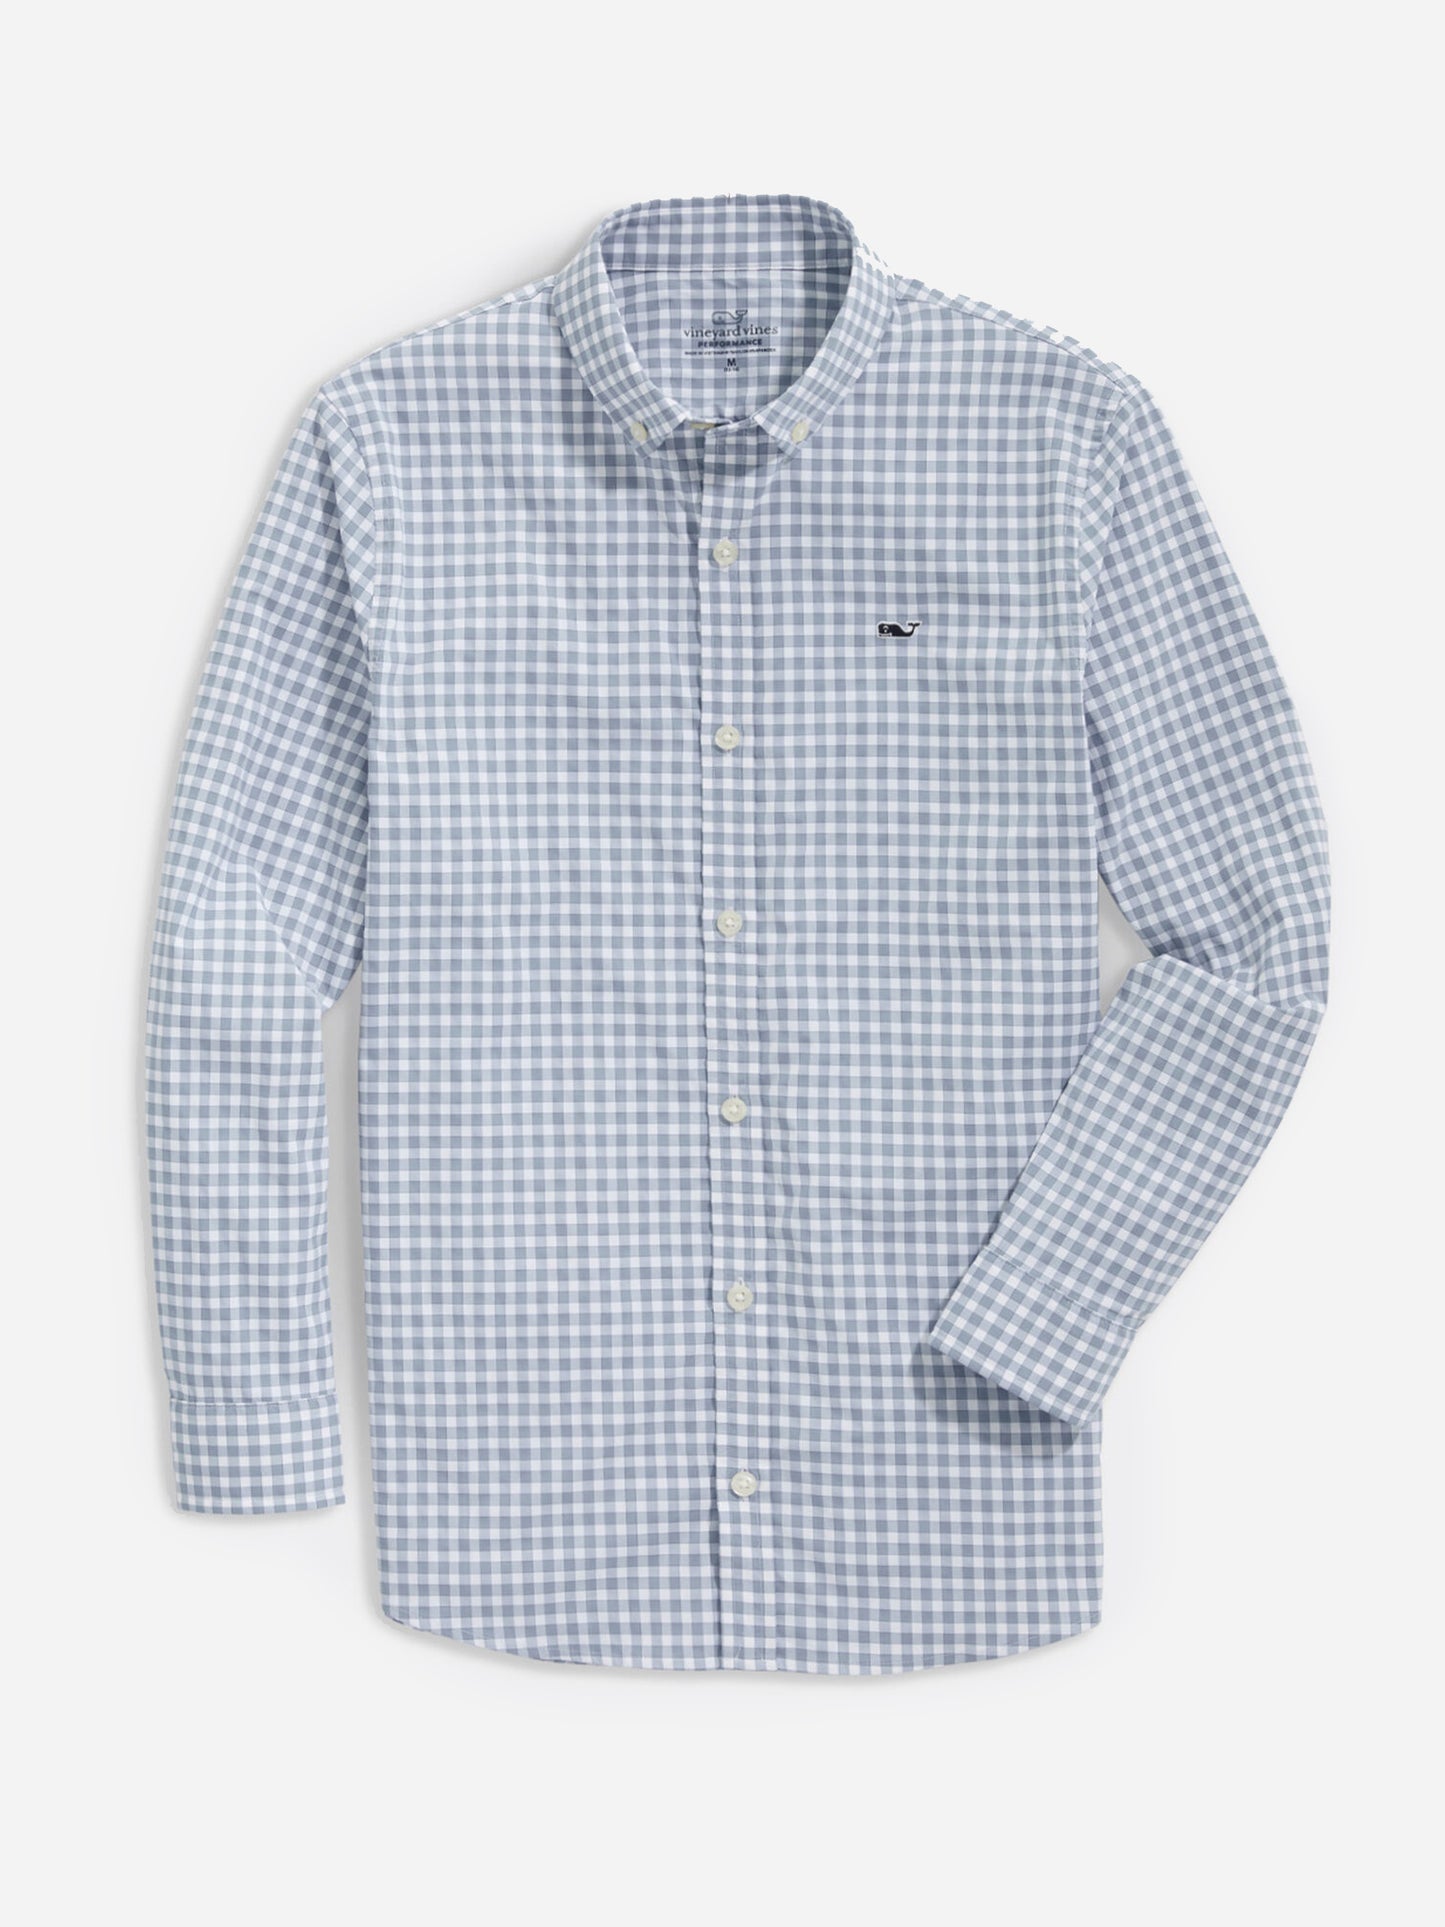 Vineyard Vines Boys' Gingham On-The-Go Performance Whale Button-Down Shirt